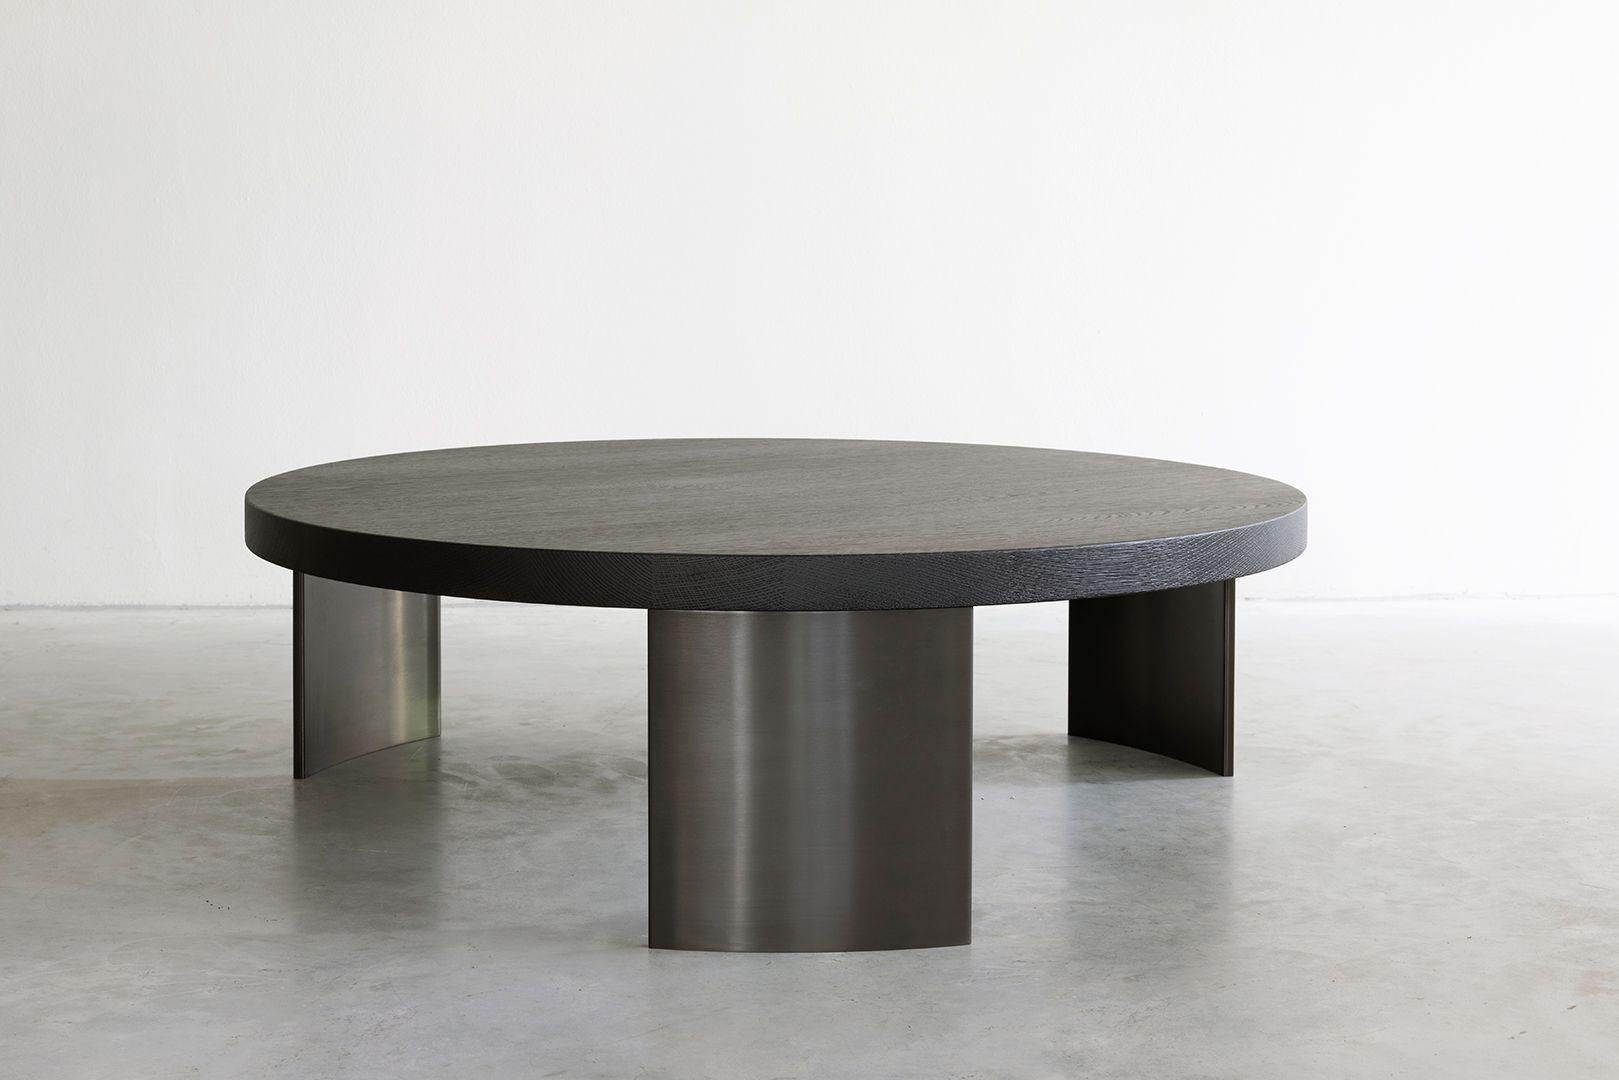 Kops coffee table large by Van Rossum
Dimensions: D112 x W112 x H35 cm
Materials: Oak, Brass.
Also available in walnut.

The wood is available in all standard Van Rossum colors, or in a matching finish to customer’s own sample.
The steel bases